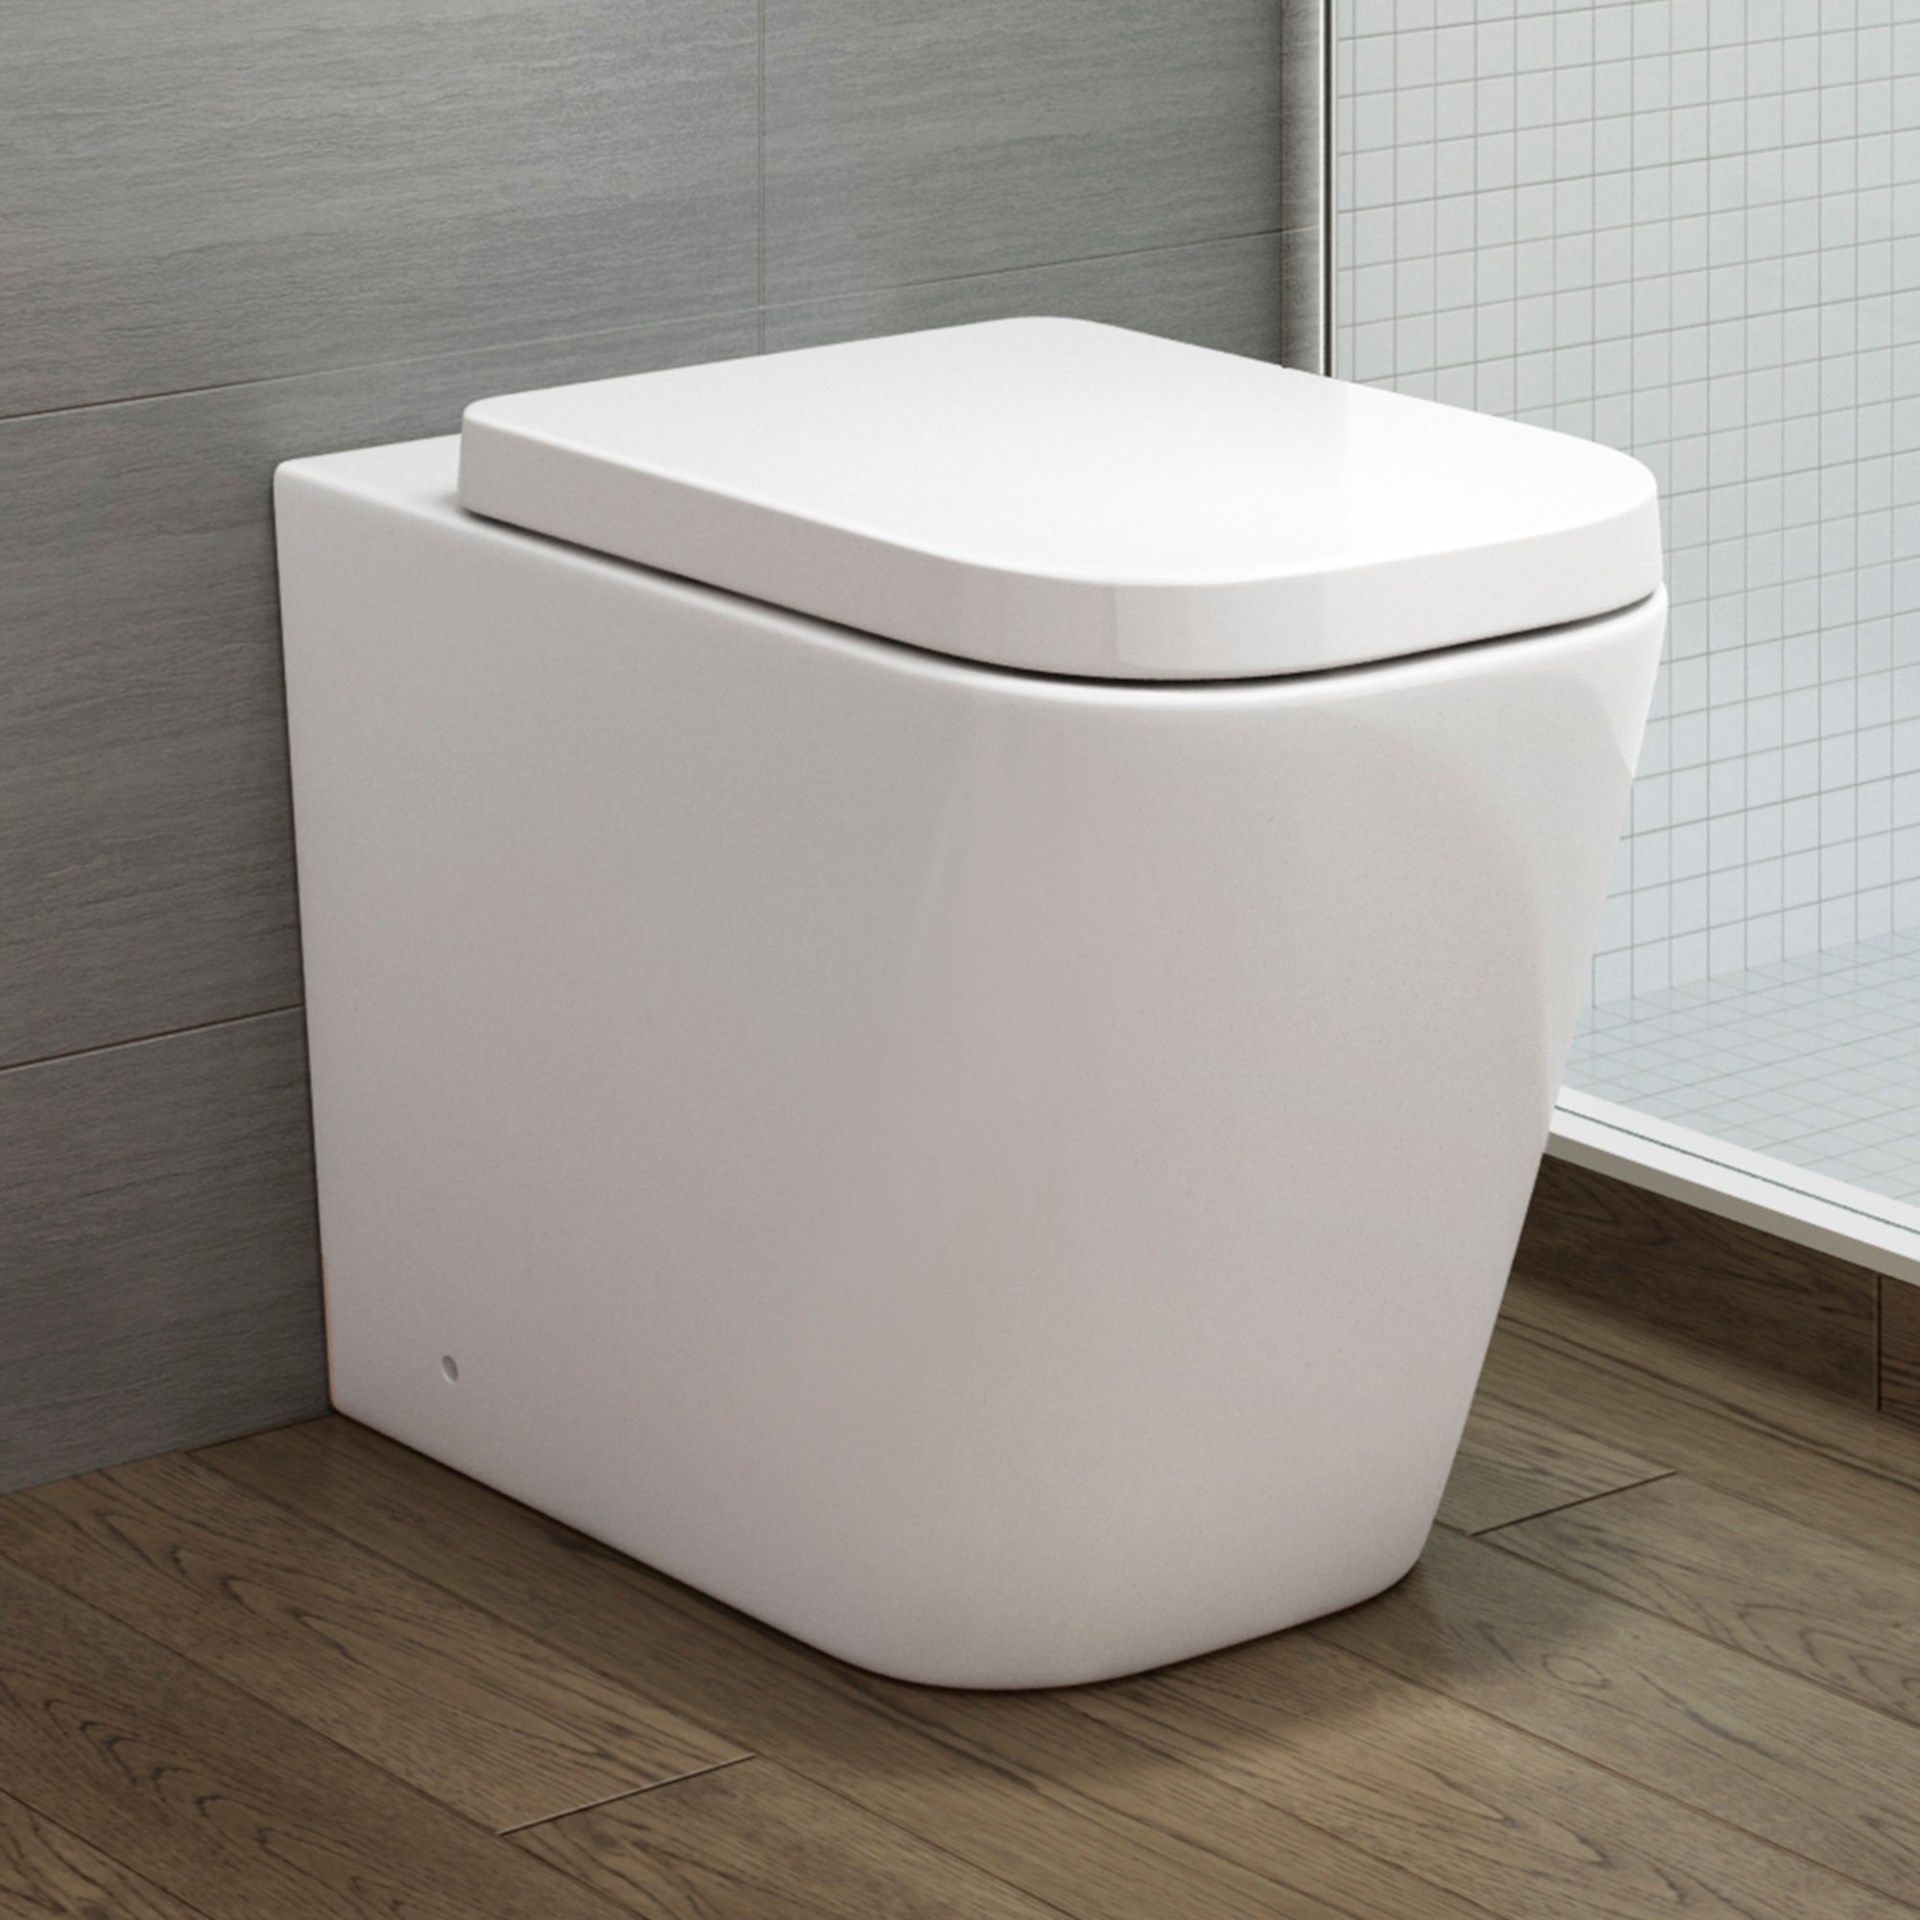 (UK40) Florence Rimless Back to Wall Toilet inc Luxury Soft Close Seat Rimless design makes it ...